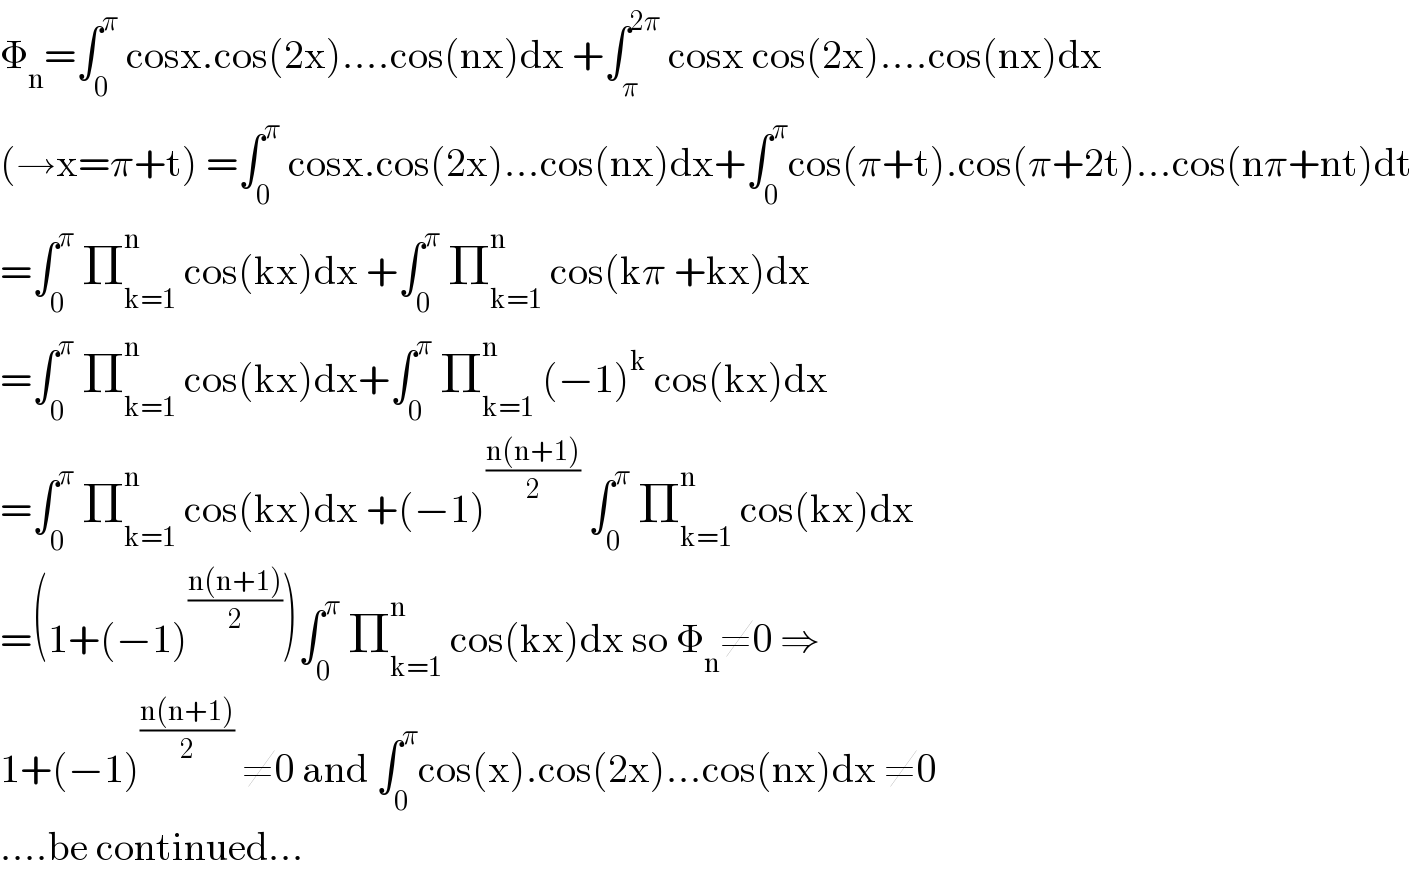 Φ_n =∫_0 ^π  cosx.cos(2x)....cos(nx)dx +∫_π ^(2π)  cosx cos(2x)....cos(nx)dx  (→x=π+t) =∫_0 ^π  cosx.cos(2x)...cos(nx)dx+∫_0 ^π cos(π+t).cos(π+2t)...cos(nπ+nt)dt  =∫_0 ^π  Π_(k=1) ^n  cos(kx)dx +∫_0 ^π  Π_(k=1) ^n  cos(kπ +kx)dx  =∫_0 ^π  Π_(k=1) ^n  cos(kx)dx+∫_0 ^π  Π_(k=1) ^n  (−1)^k  cos(kx)dx  =∫_0 ^π  Π_(k=1) ^n  cos(kx)dx +(−1)^((n(n+1))/2)  ∫_0 ^π  Π_(k=1) ^n  cos(kx)dx  =(1+(−1)^((n(n+1))/2) )∫_0 ^π  Π_(k=1) ^n  cos(kx)dx so Φ_n ≠0 ⇒  1+(−1)^((n(n+1))/2)  ≠0 and ∫_0 ^π cos(x).cos(2x)...cos(nx)dx ≠0  ....be continued...  